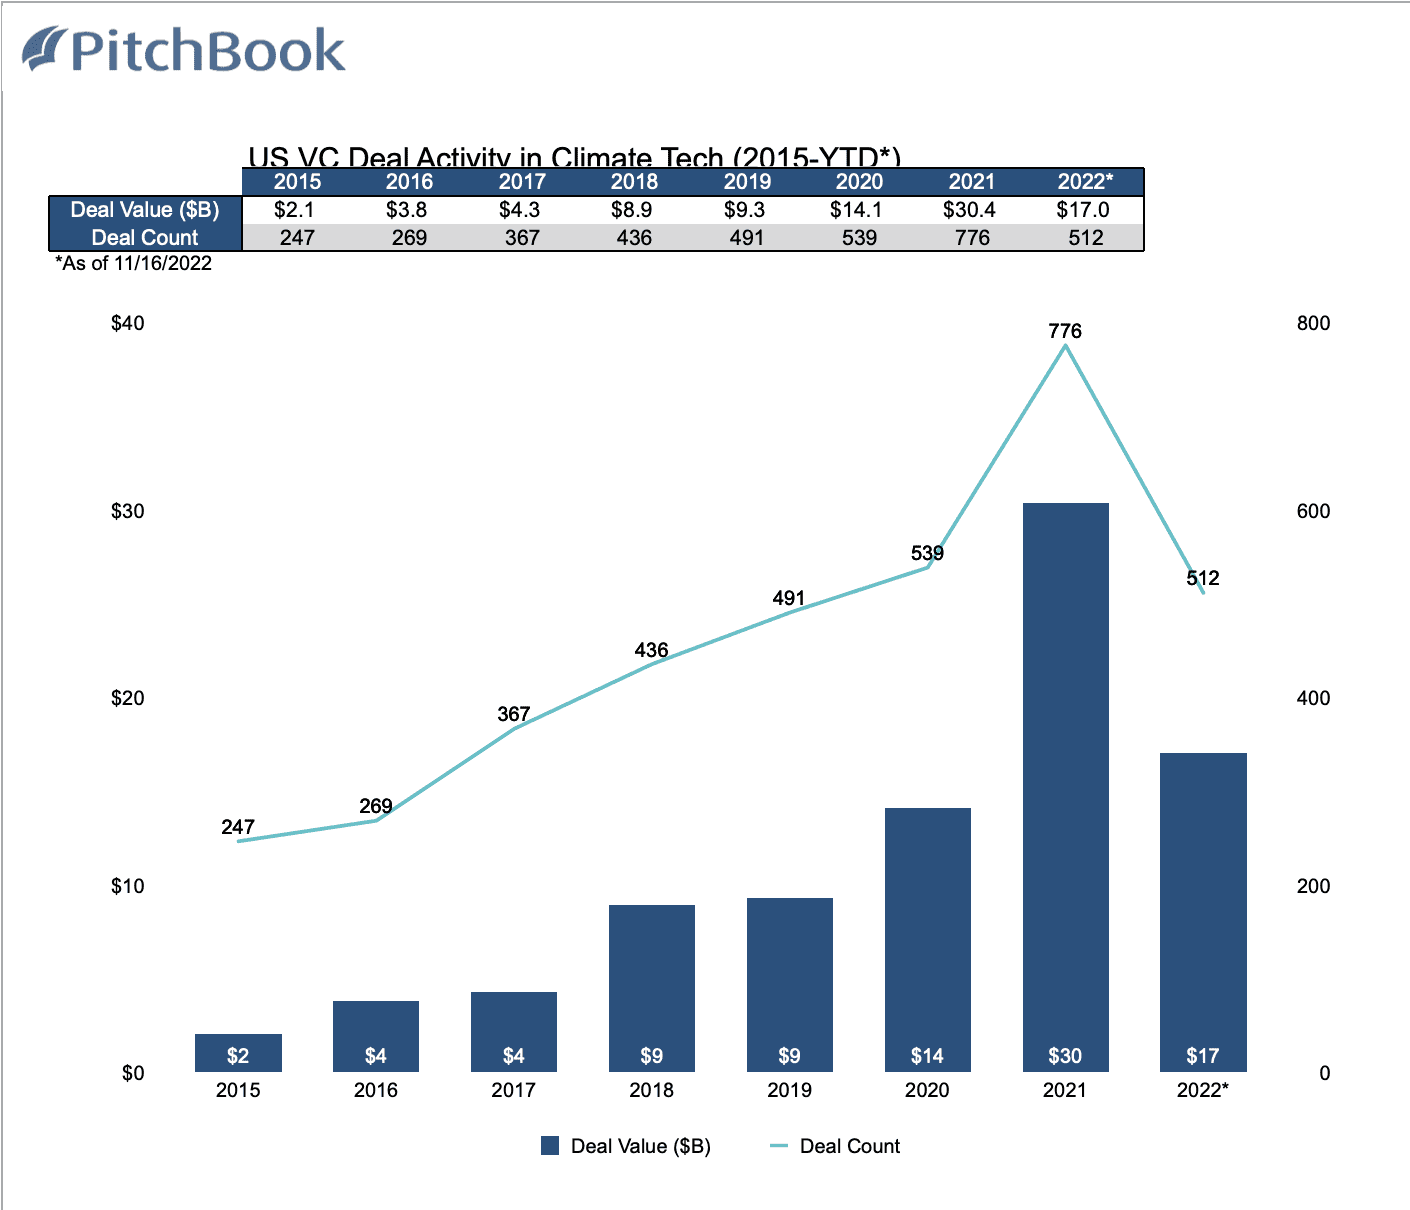 Pitchbook includes companies developing technologies to mitigate or adapt to climate change in this category. Examples include renewable energy generation, long duration energy storage, the electrification of transportation, agricultural innovations, industrial process improvements, and mining technologies.